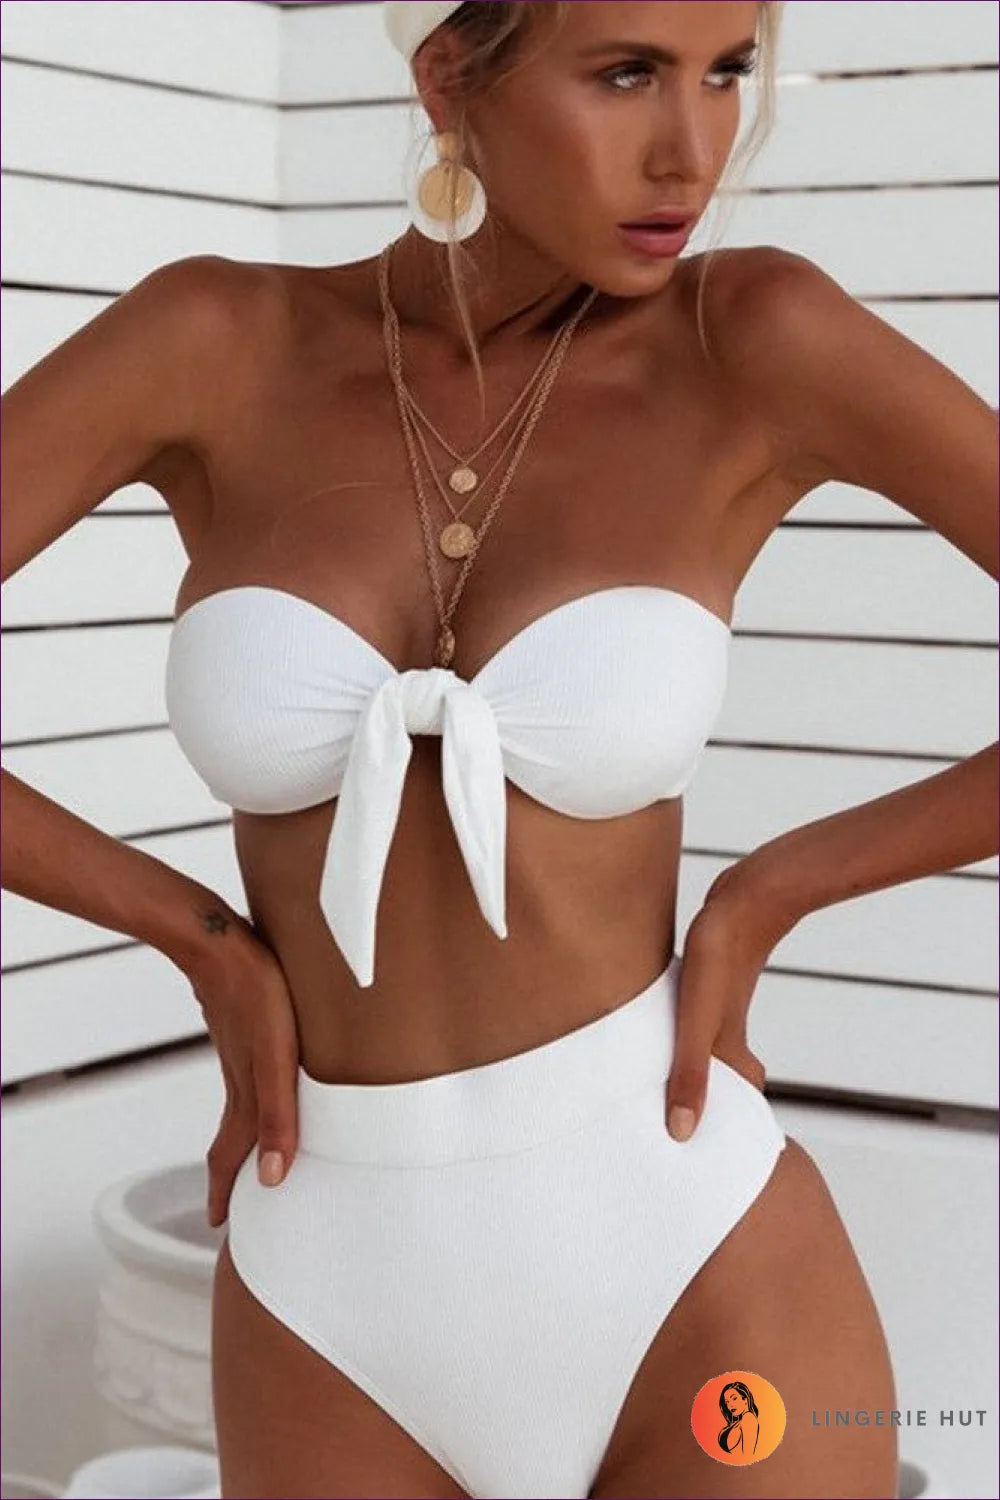 Own The Beach With Our Popular High Waist Knotted Bikini. Crafted For Comfort And Confidence, It’s Your Ticket